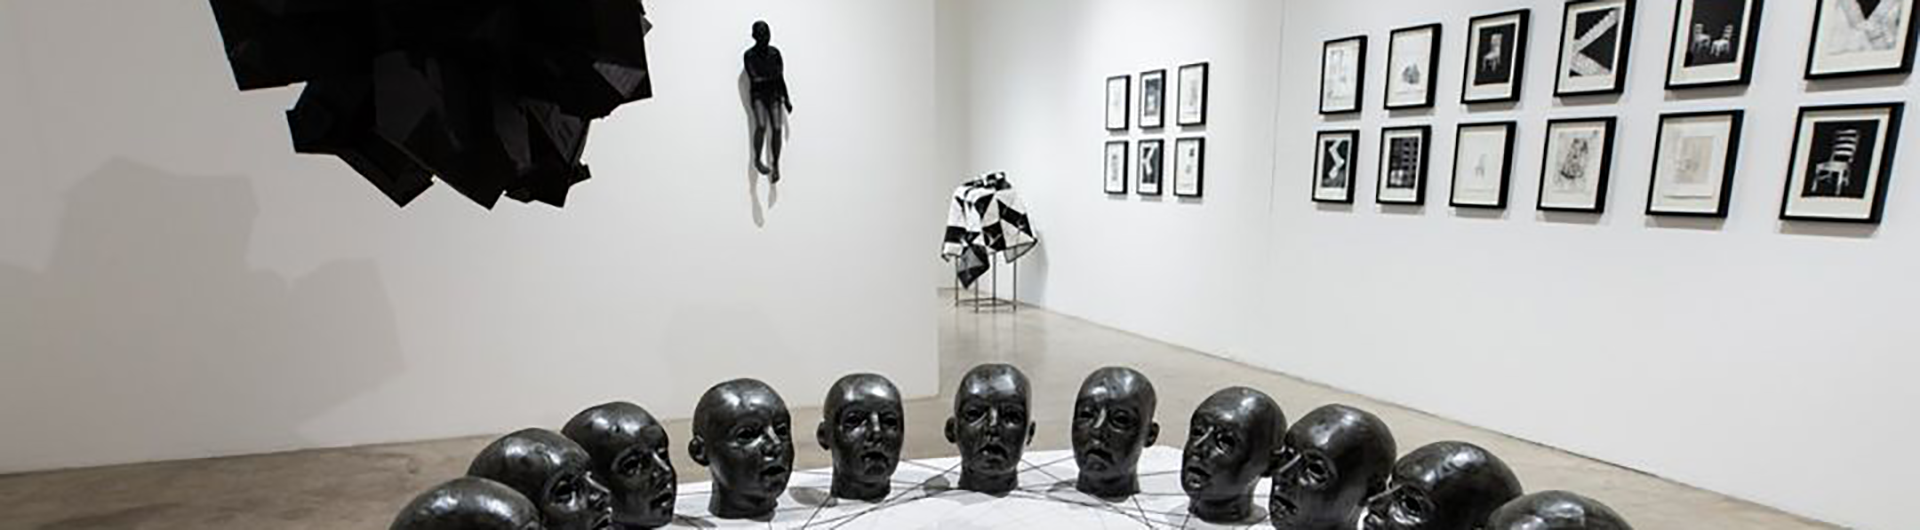 Art gallery interior showing sculptures and prints